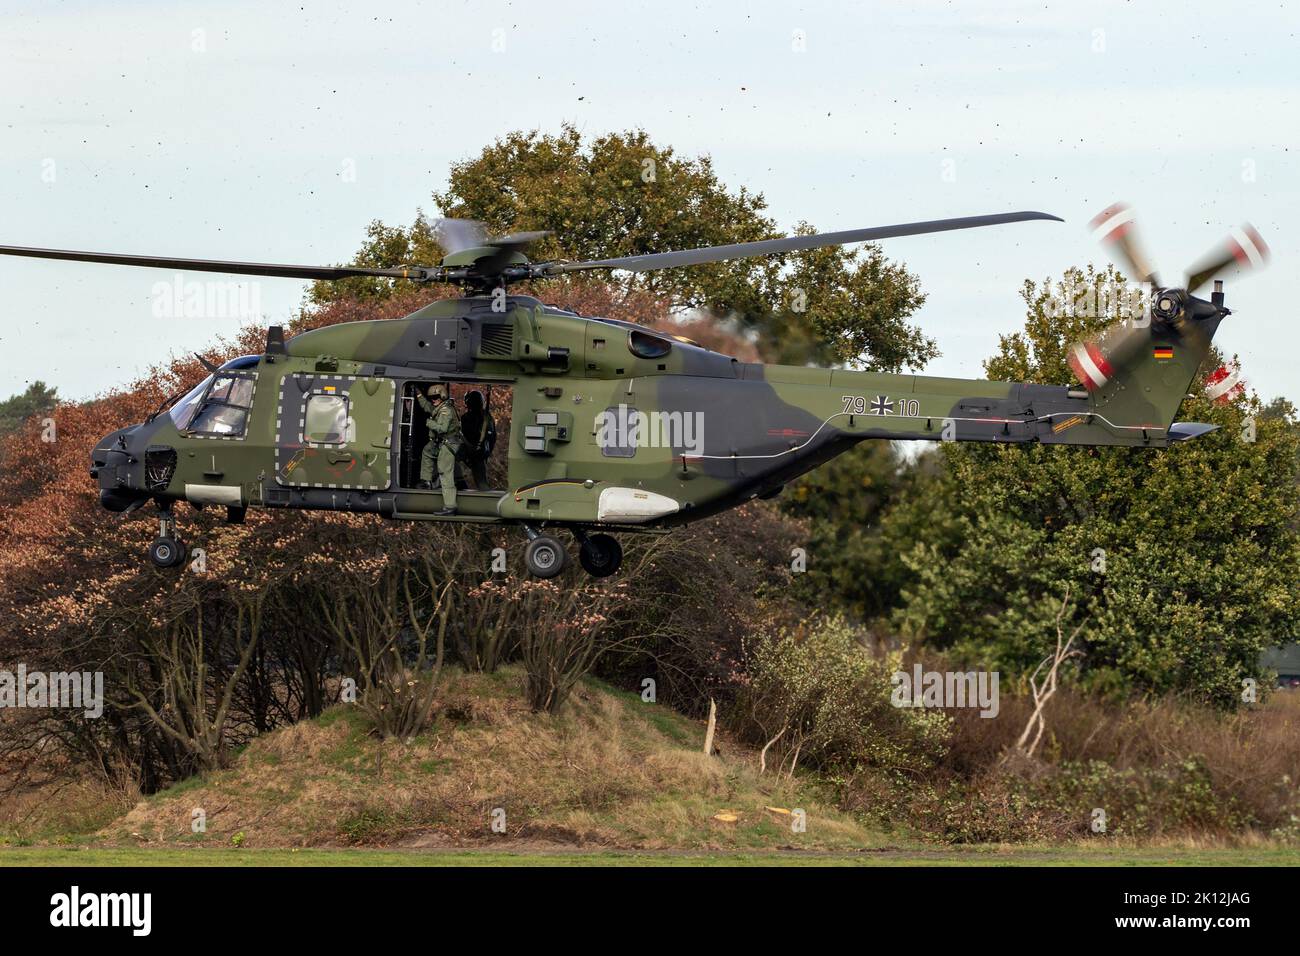 Crew chief hanging out of a German Army NH90 helicopter taking off from Deelen airbase during Falcon Autumn exercise. Deelen, The Netherlands - Octobe Stock Photo